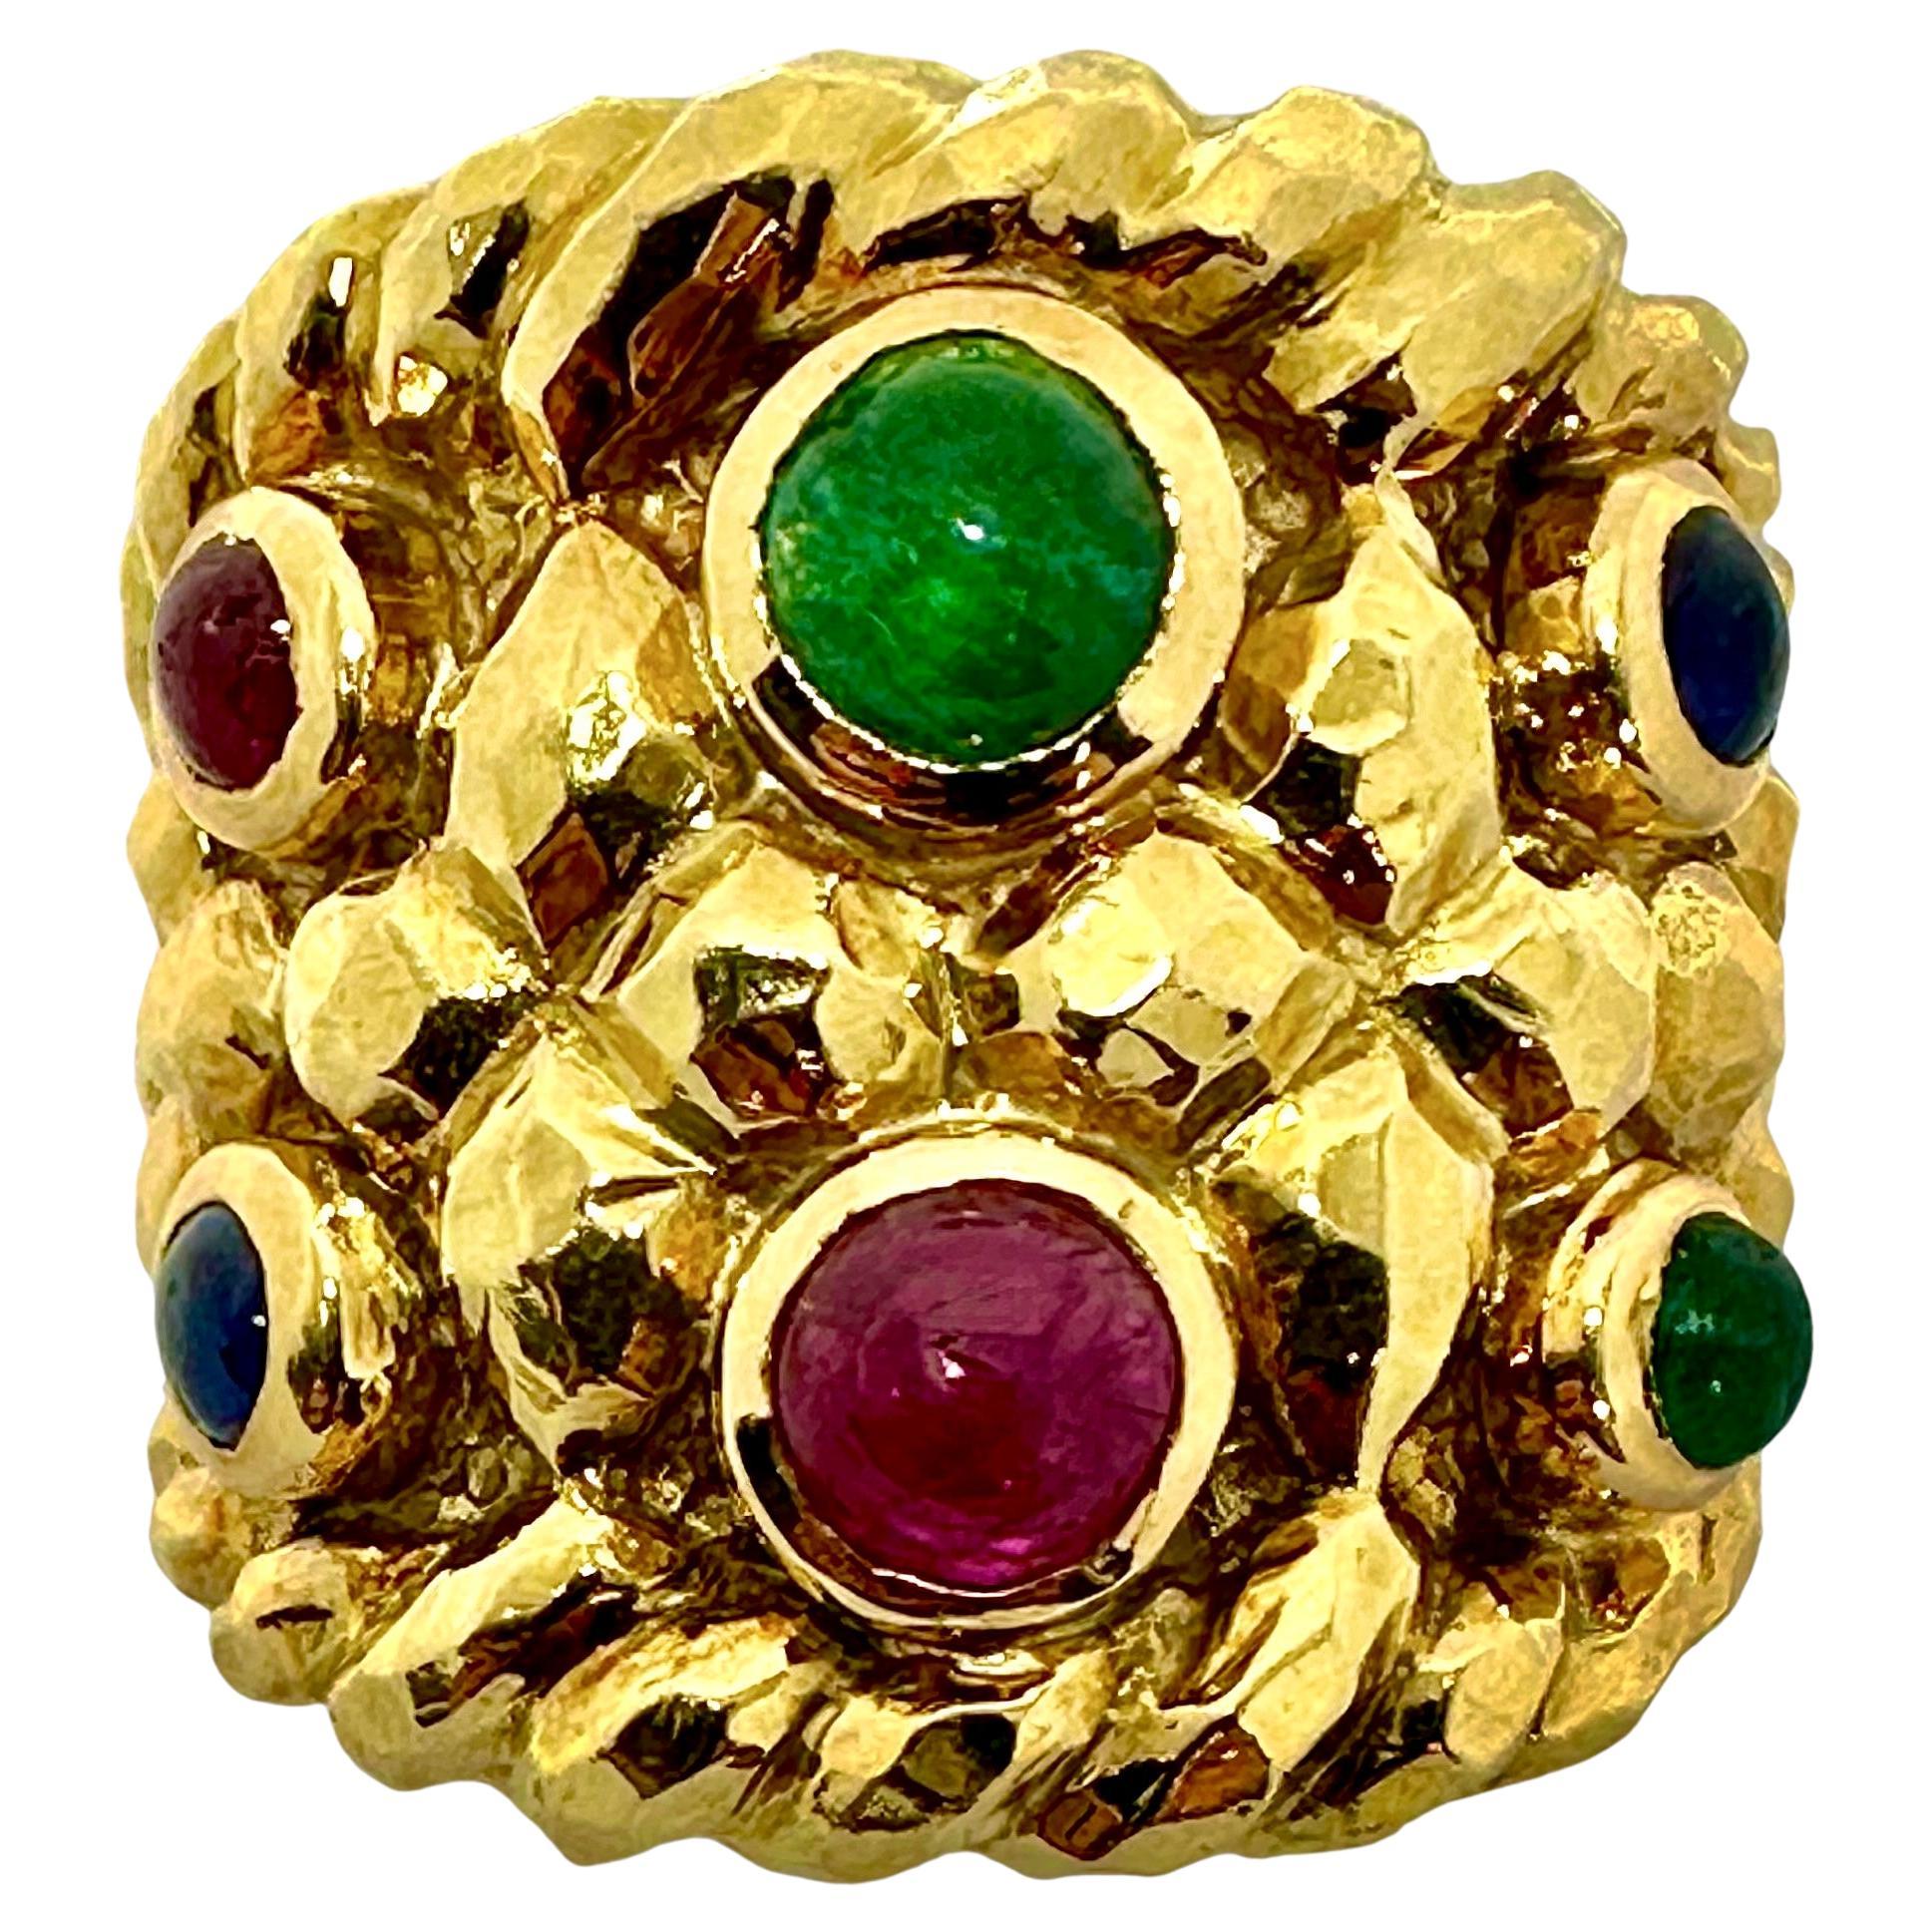 Vintage David Webb Yellow Gold Emerald, Sapphire and Ruby Ring